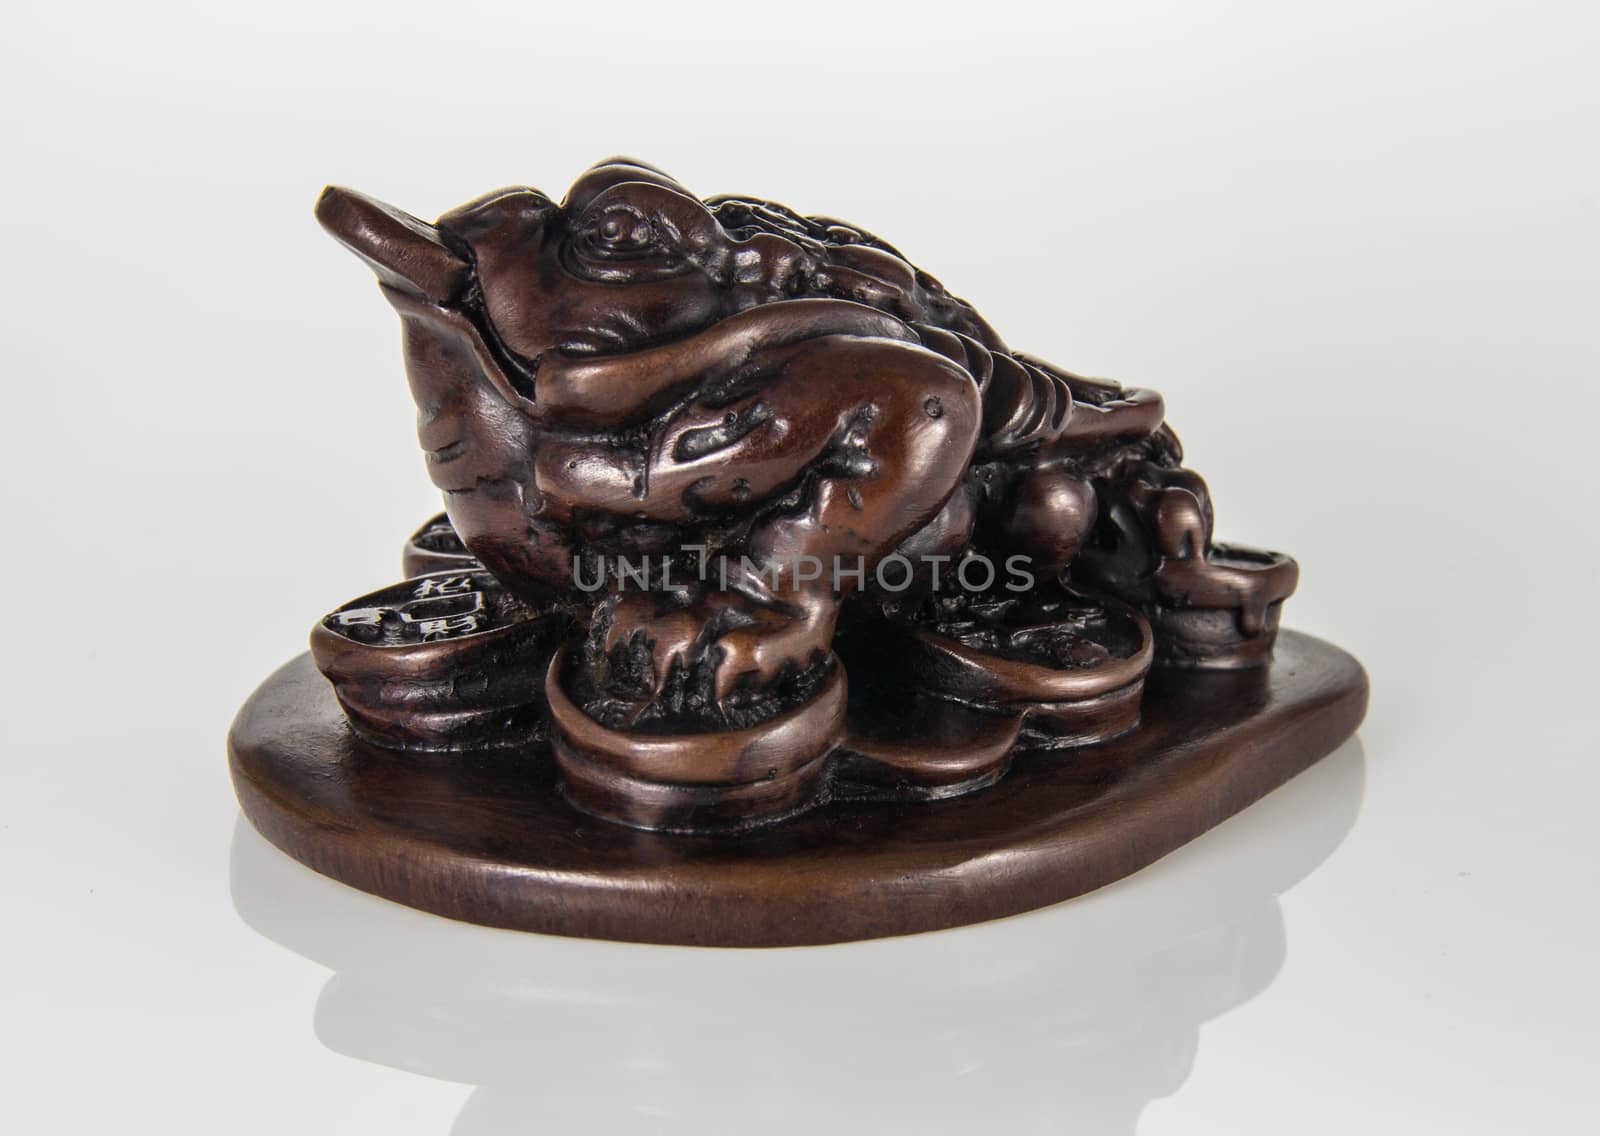 Three Legged Toad or Frog Feng Shui charm for prosperity